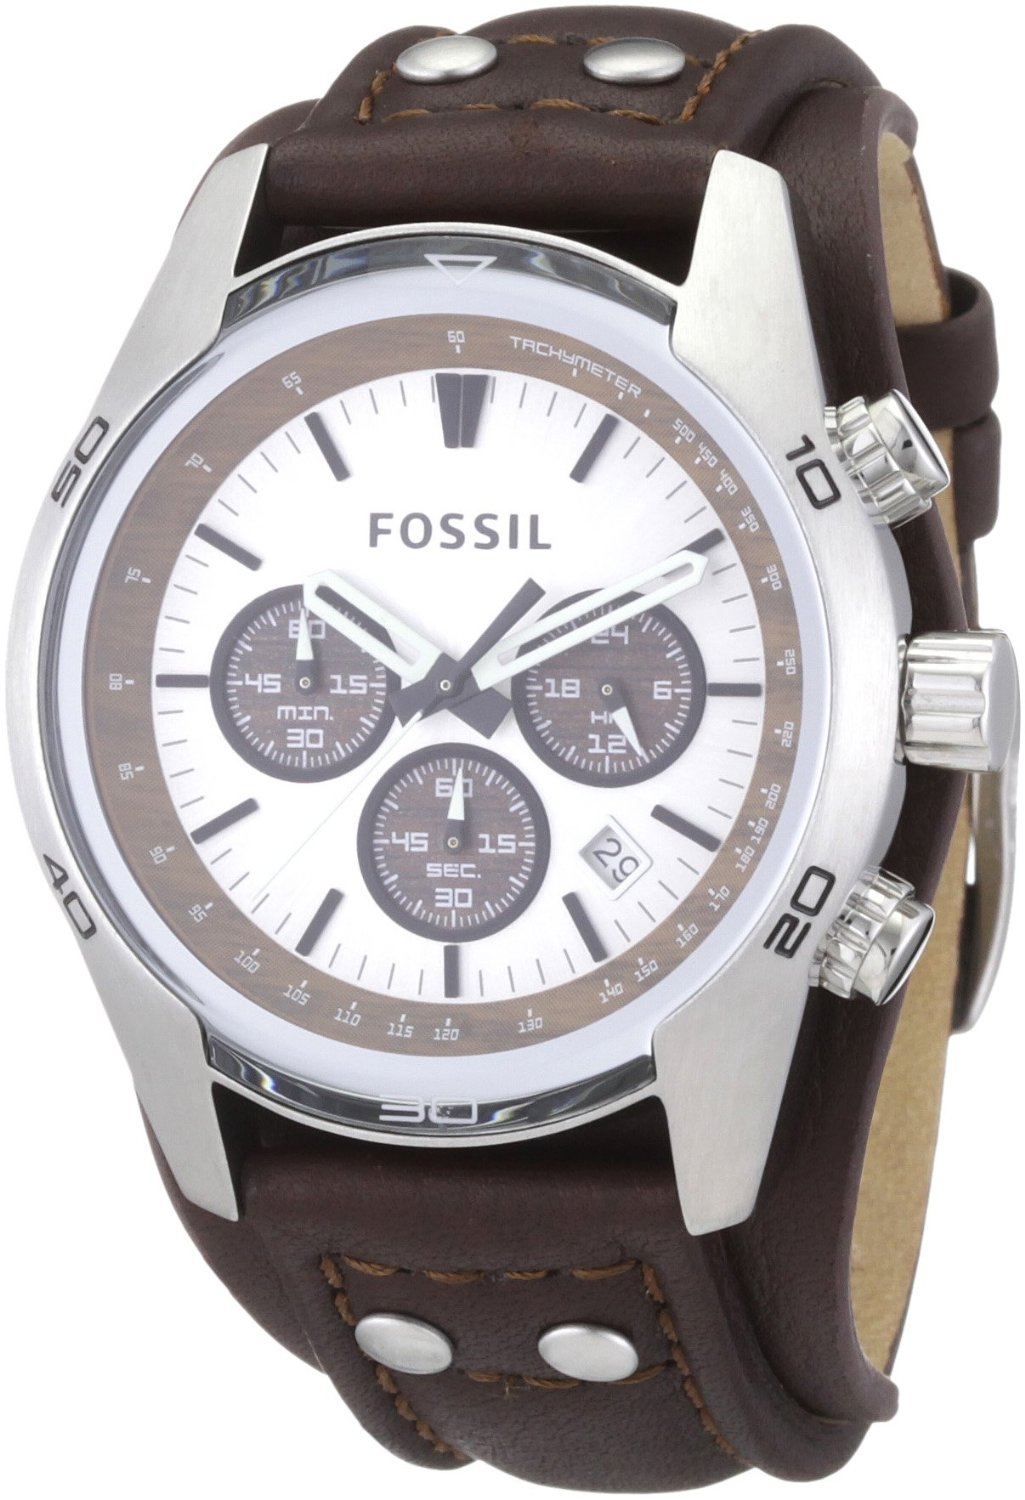 Fossil watches for men: Fossil men's Cuff Leather Watch